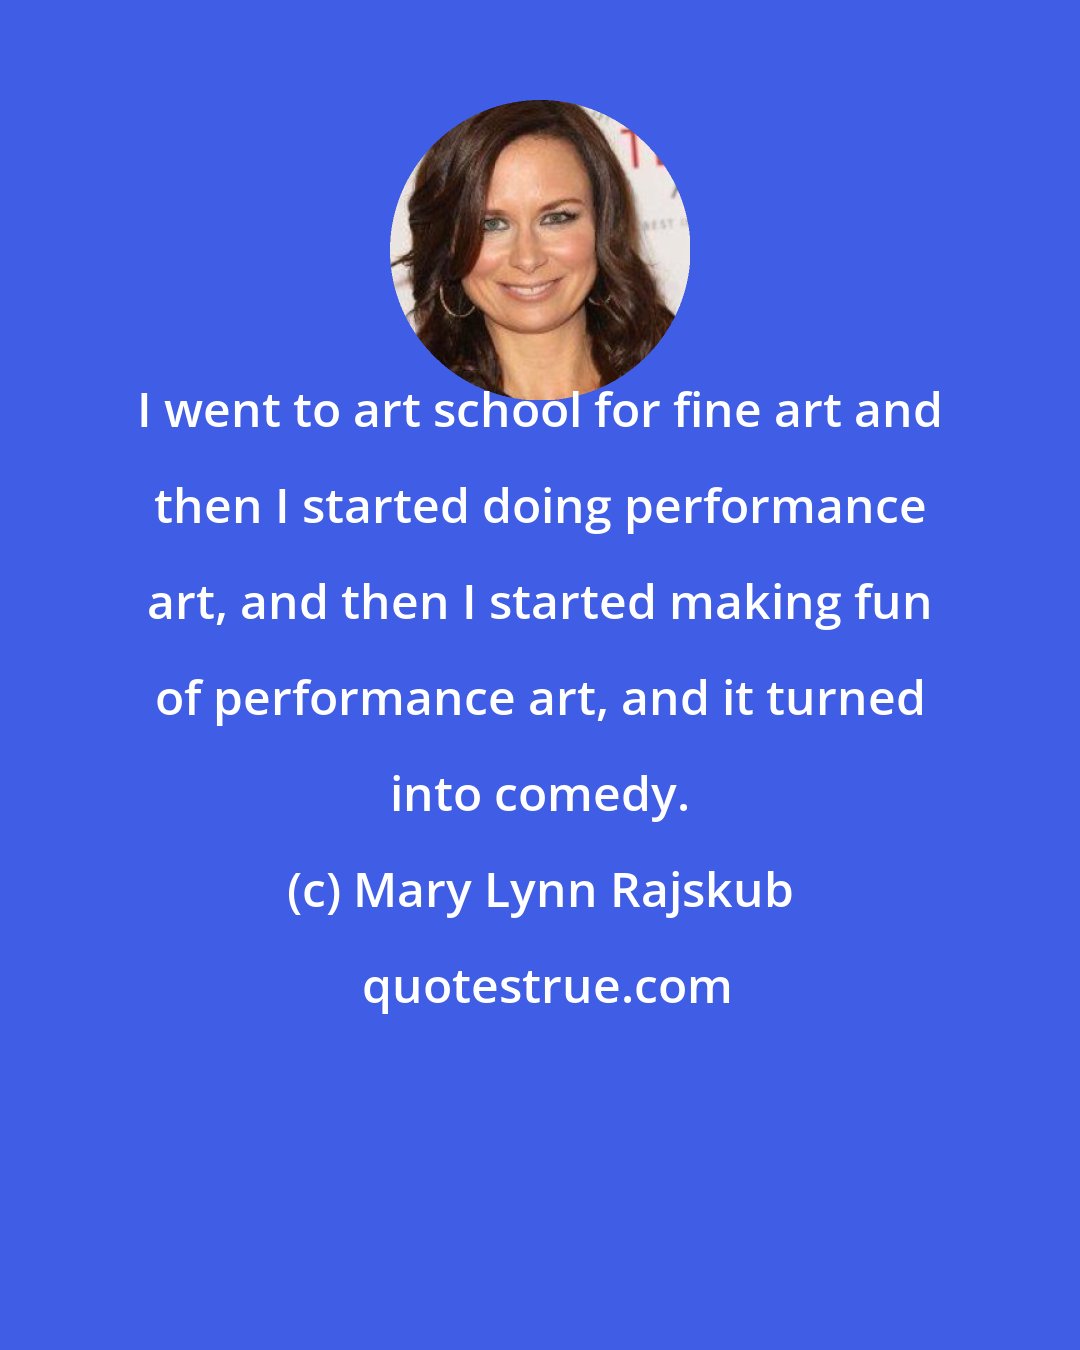 Mary Lynn Rajskub: I went to art school for fine art and then I started doing performance art, and then I started making fun of performance art, and it turned into comedy.